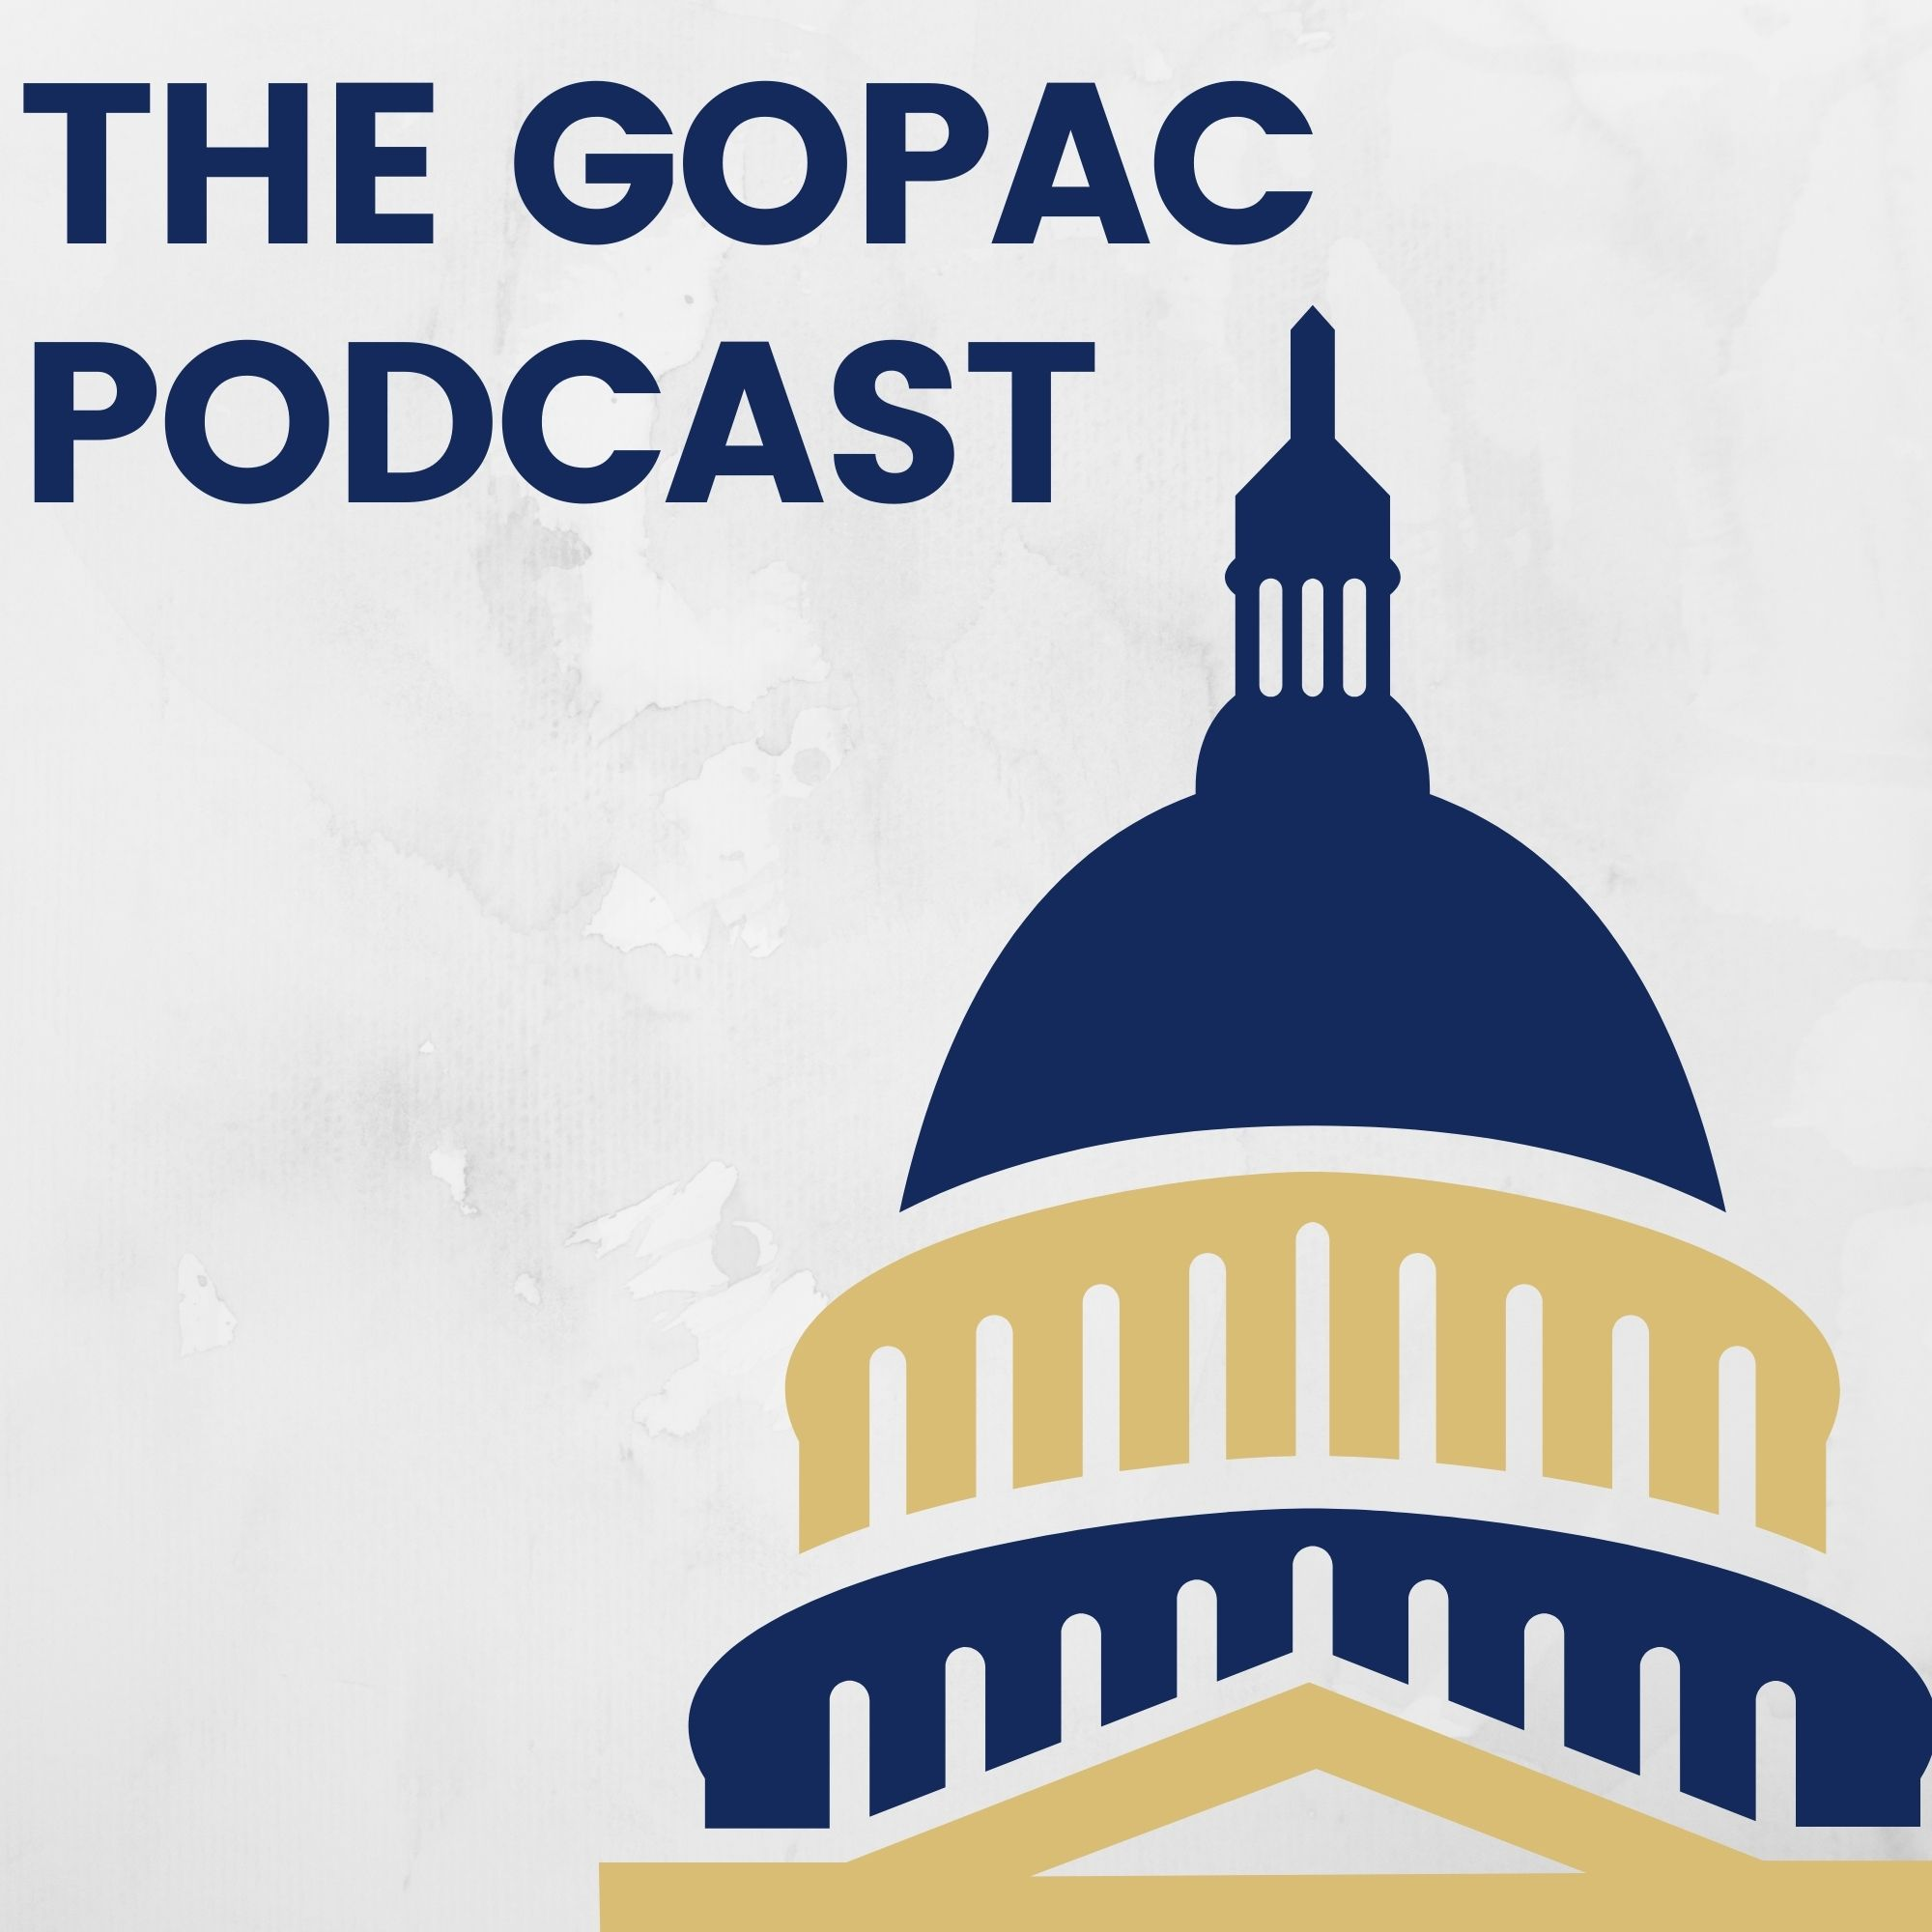 Pollster Adam Geller with details of a GOPAC sanctioned national survey of Republican voters